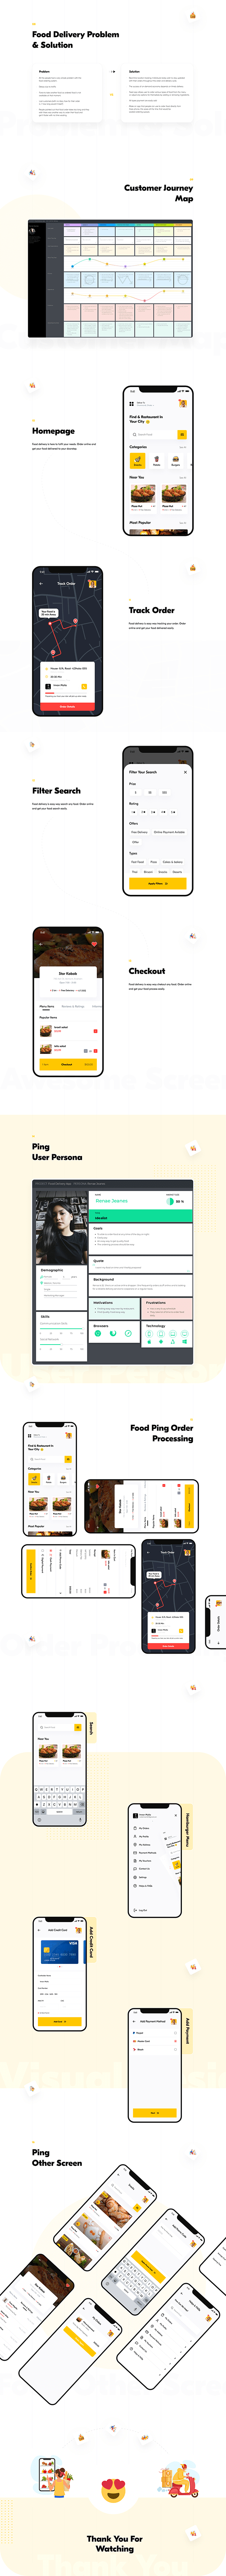 Food Ping - Food Delivery App - UI/UX Design Case Study